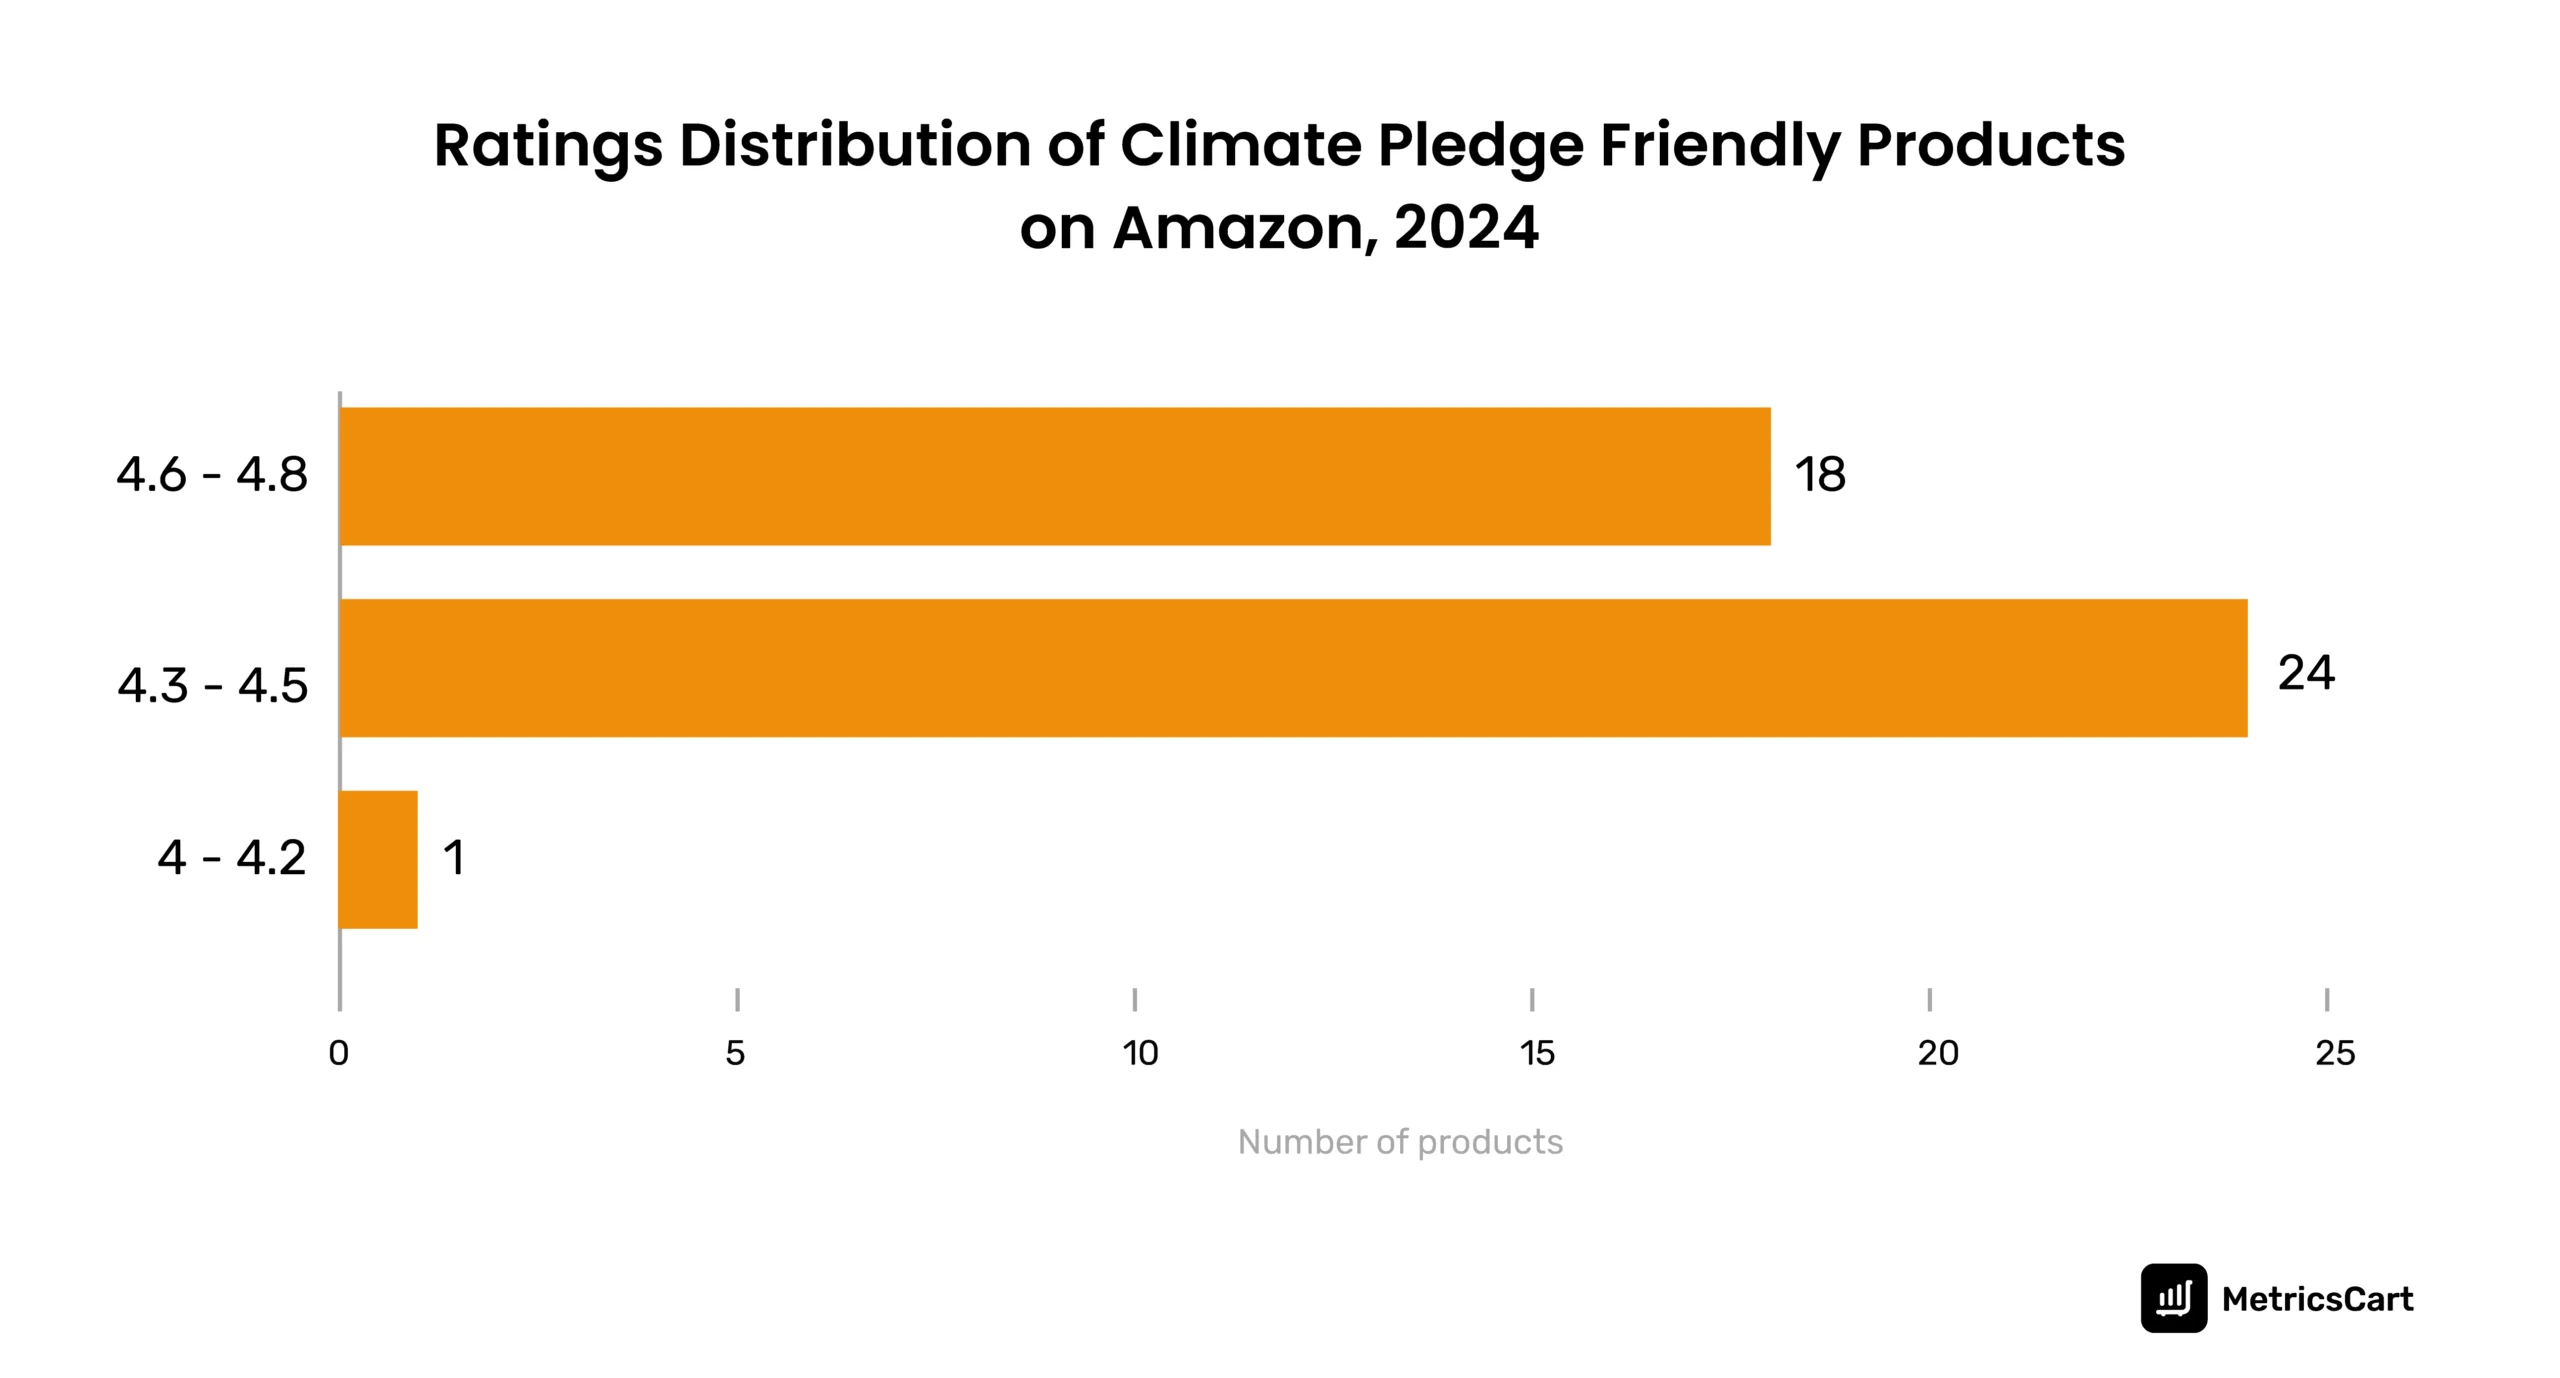 An infographic showing the rating distribution of Climate Pledge Friendly products on Amazon